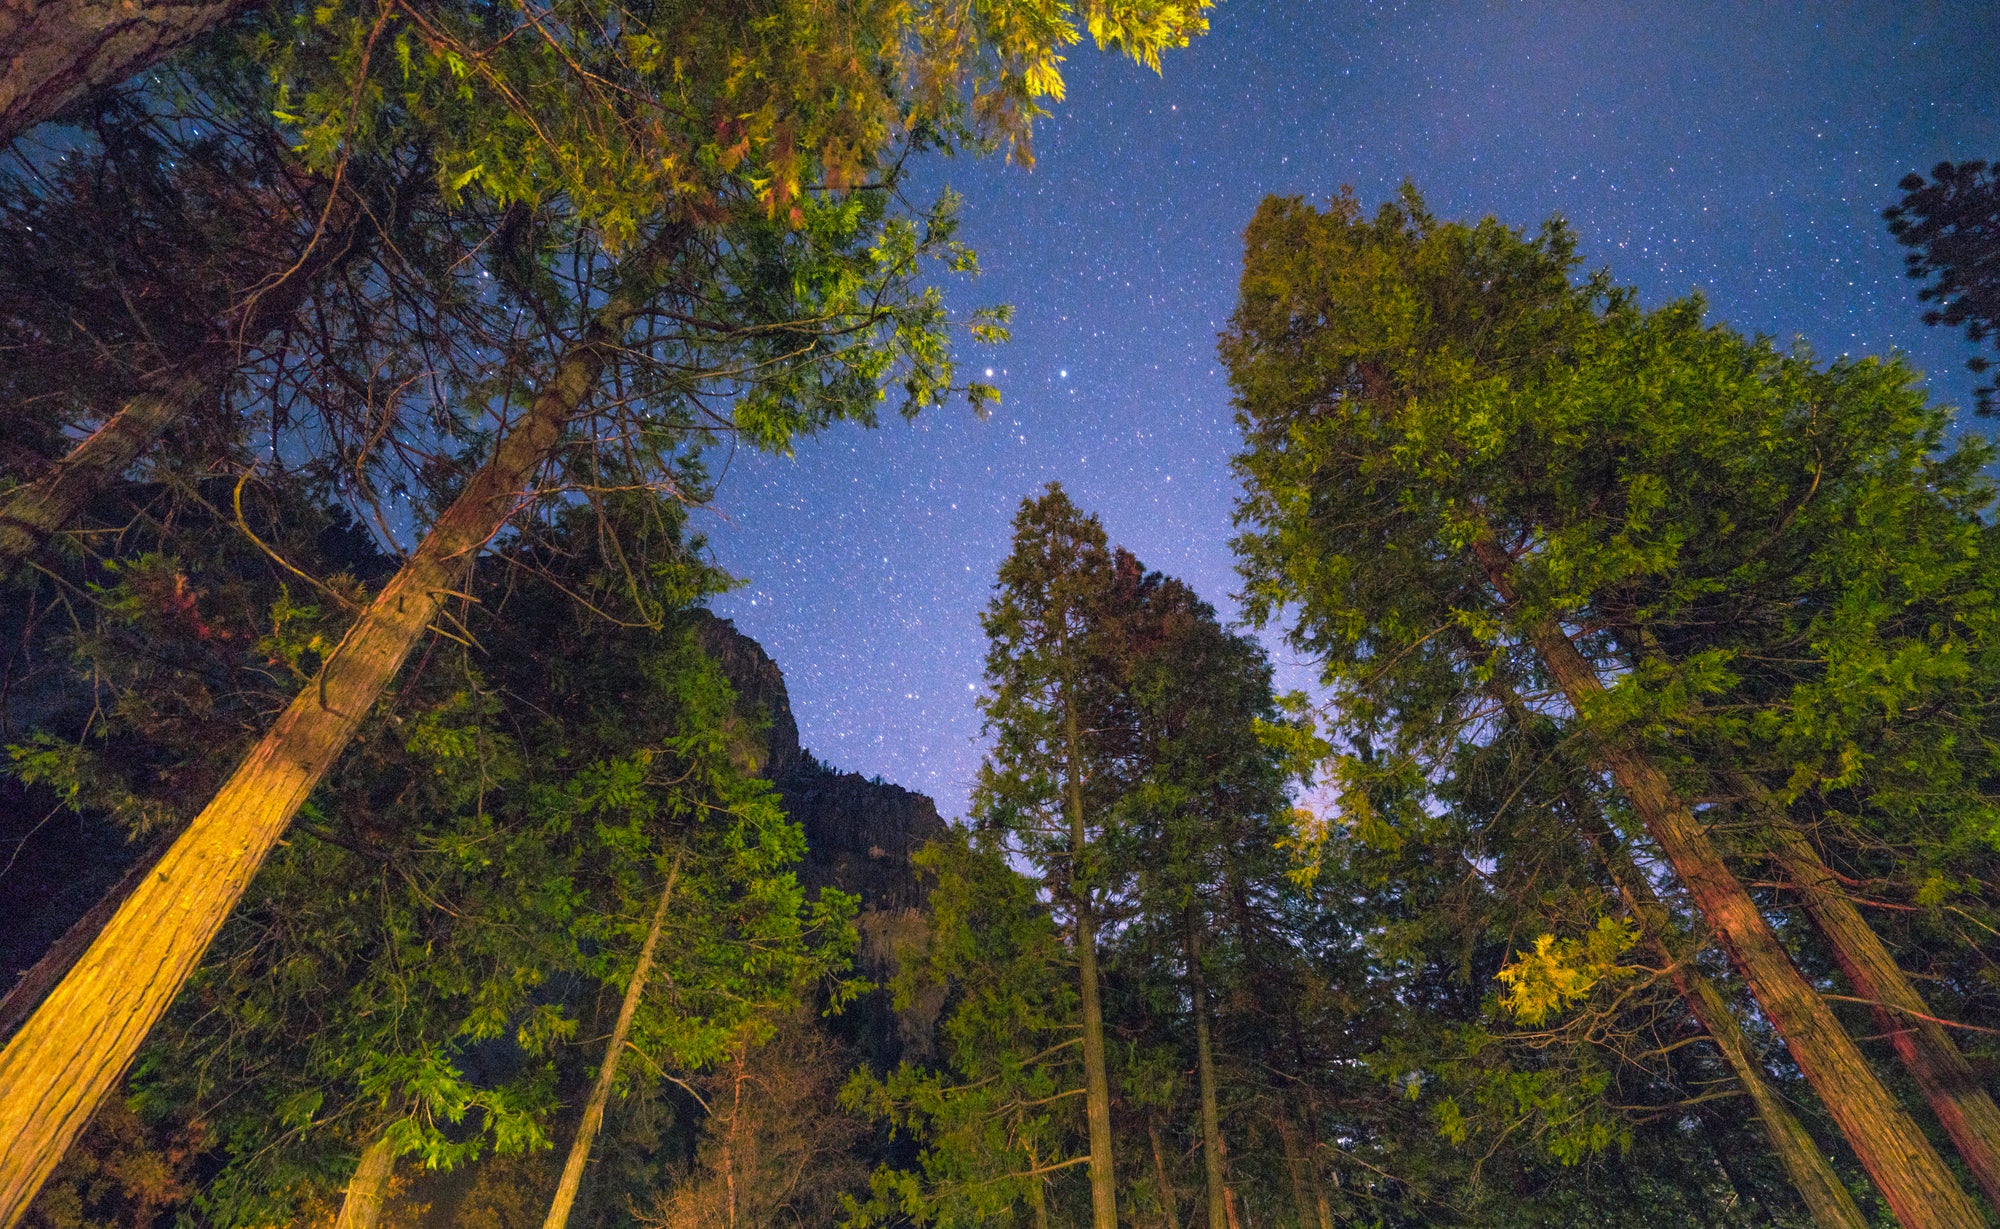 Upper Pines Campground in Yosemite National Park, California